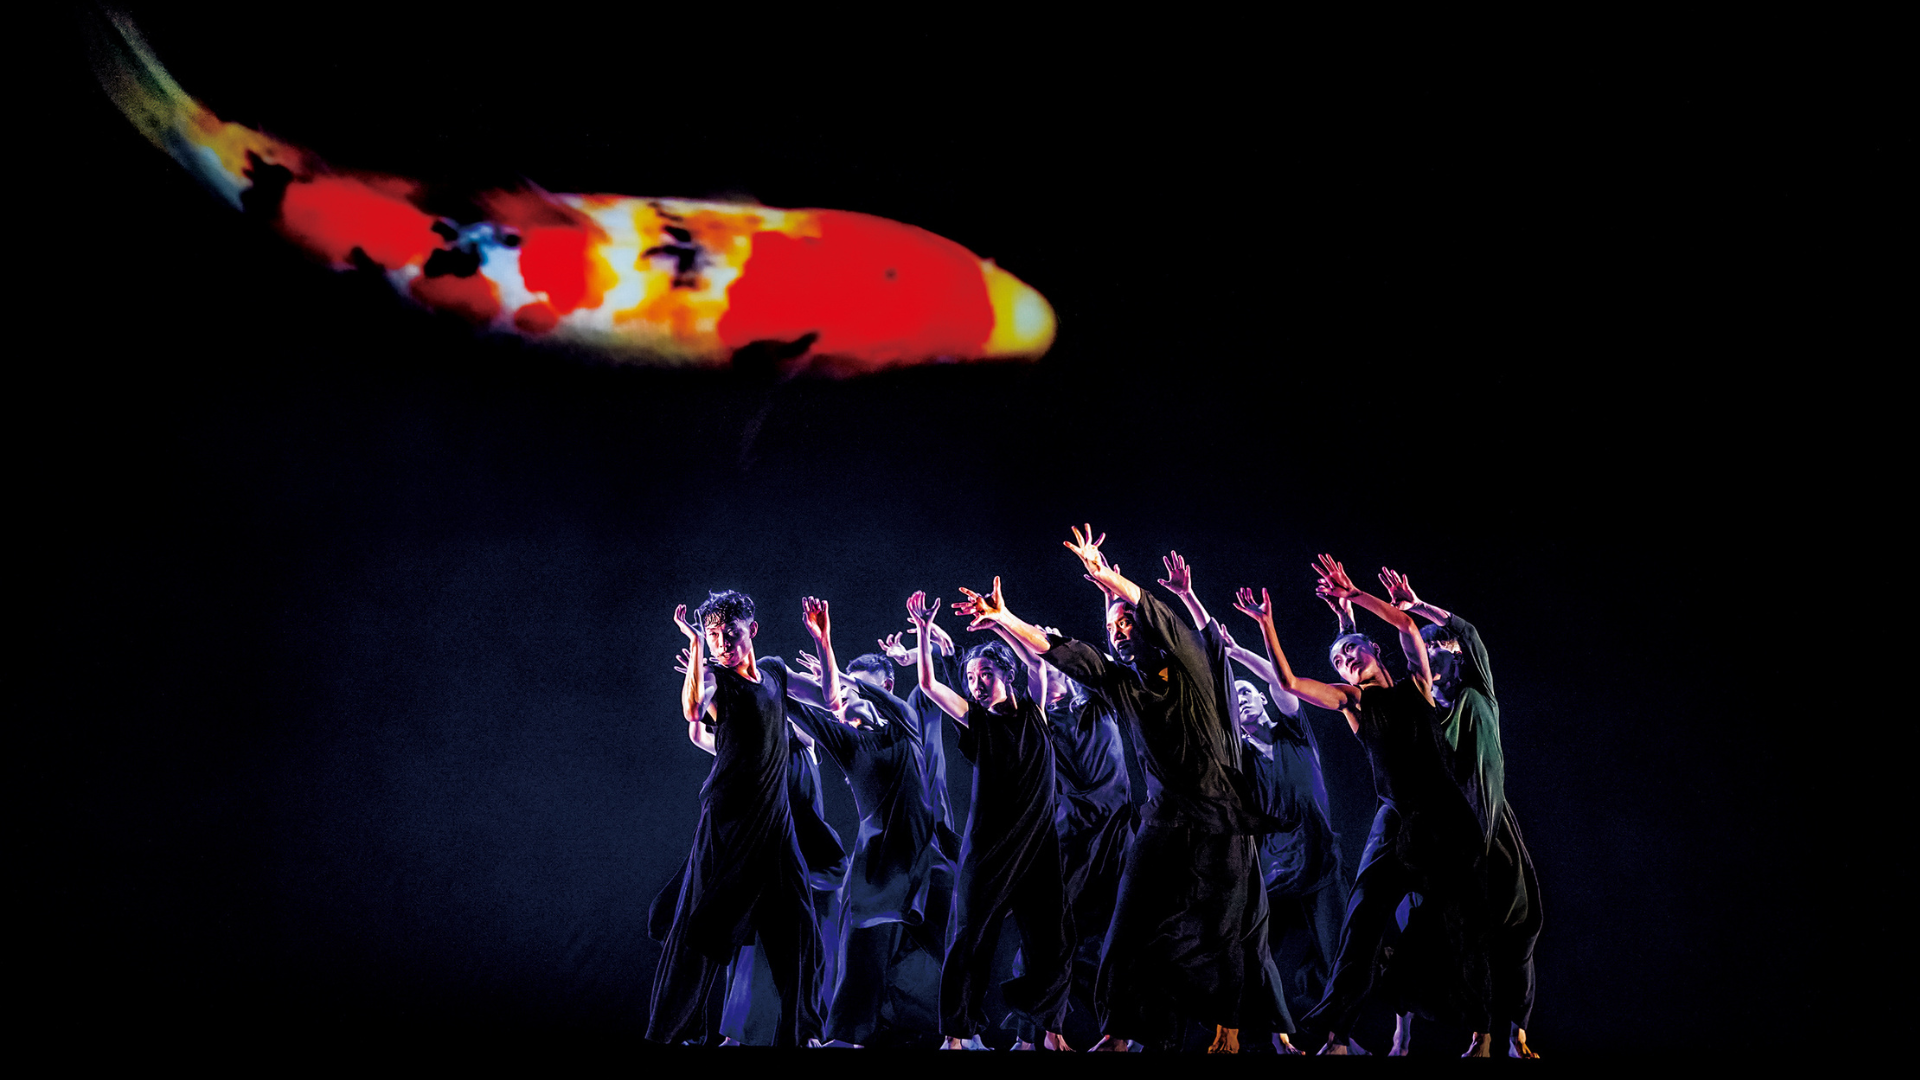 A group of dancers in dark clothing on a dark stage reach up towards the giant projection of a brightly coloured koi fish